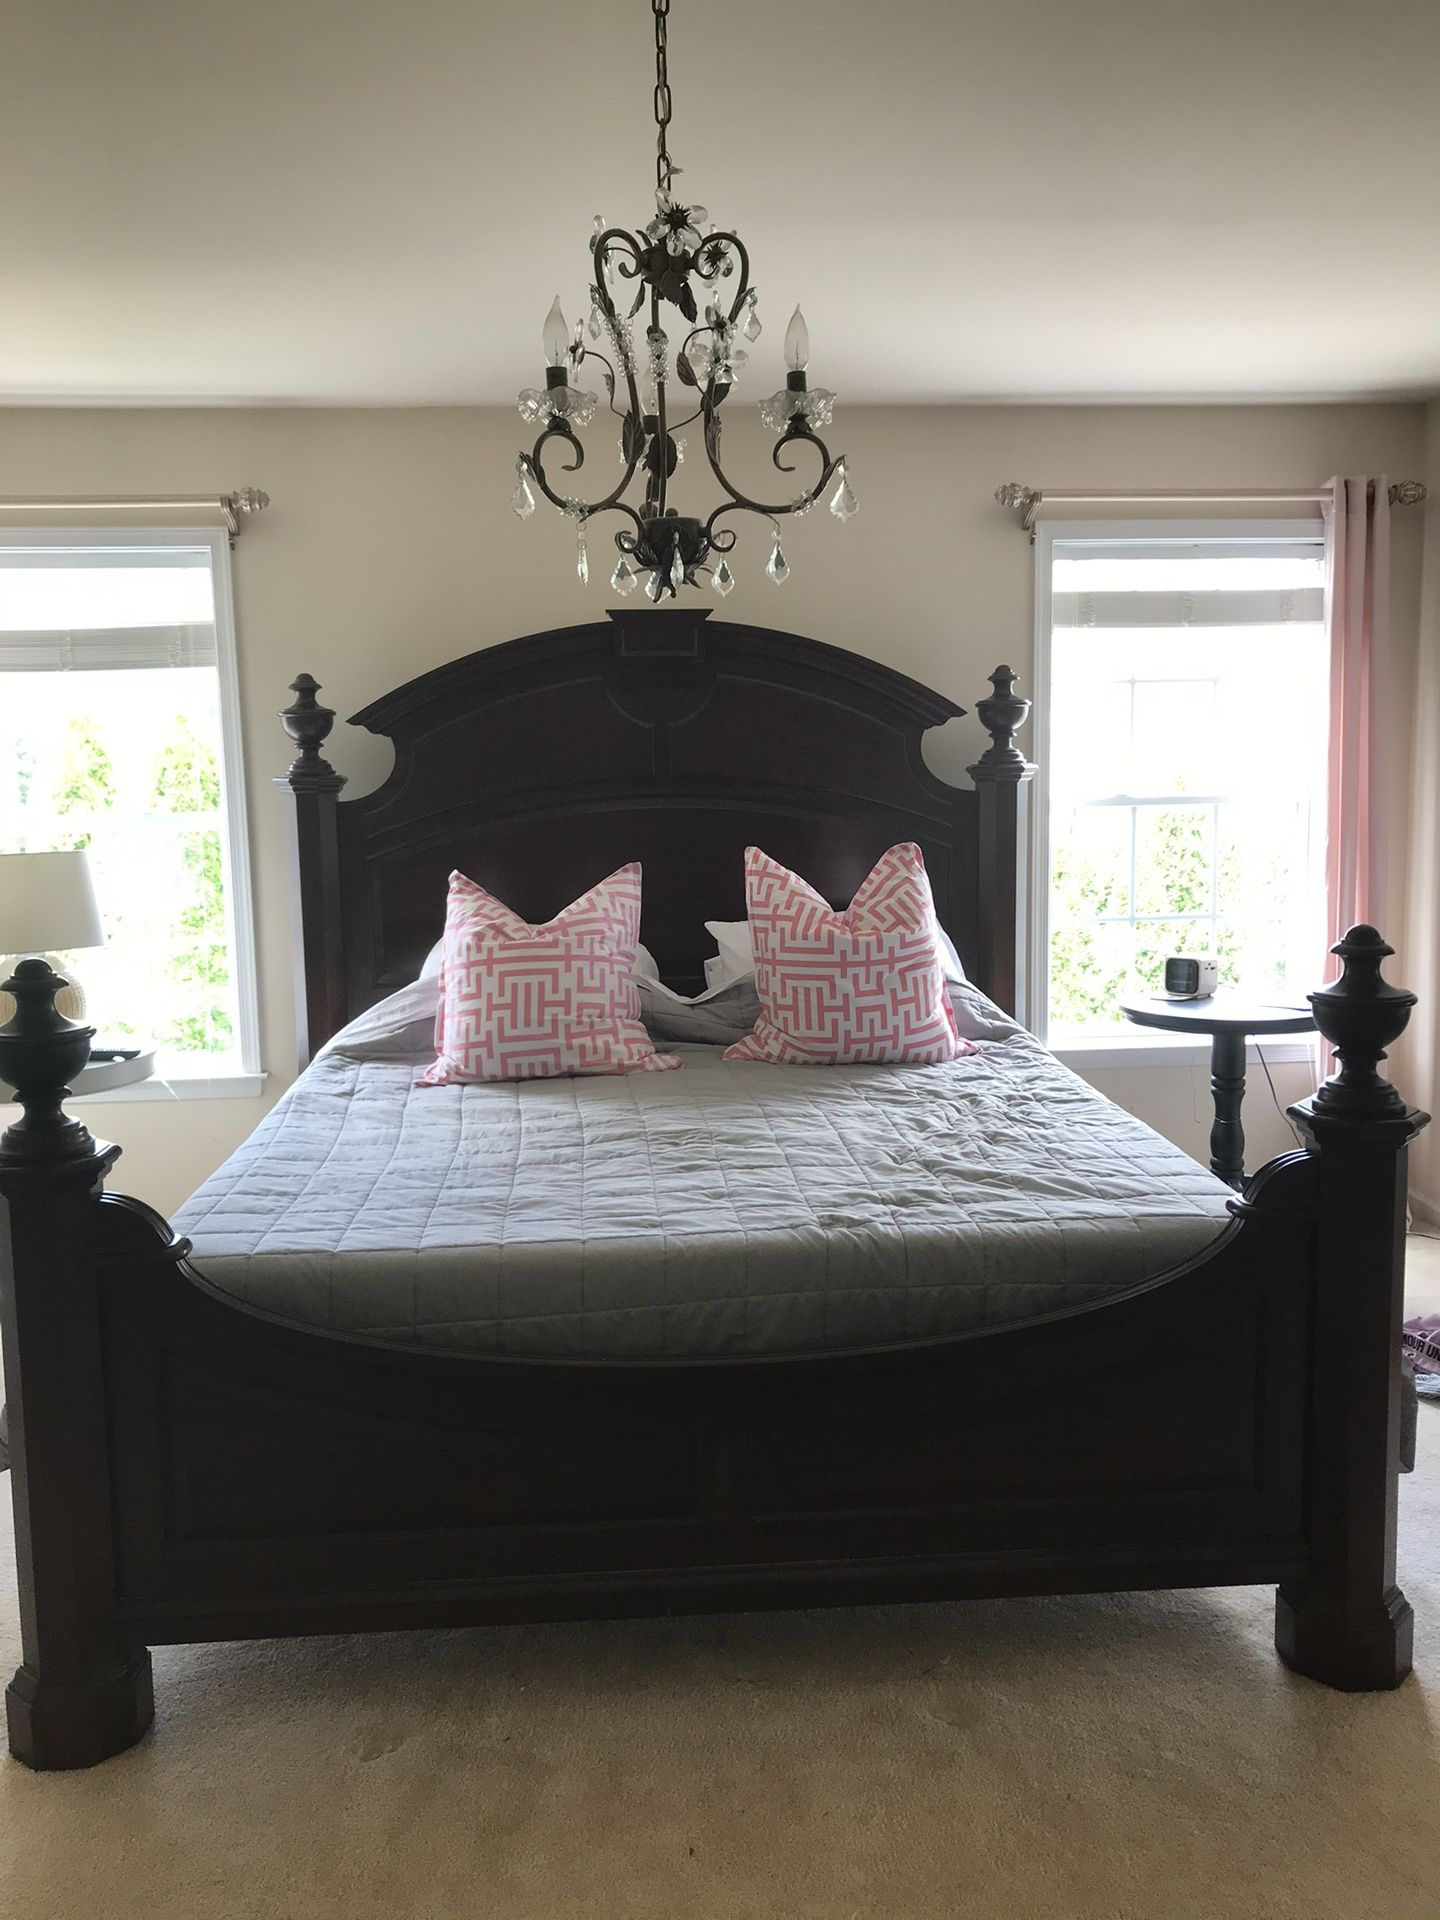 Pennsylvania House SOLID WALNUT KING BED $399 